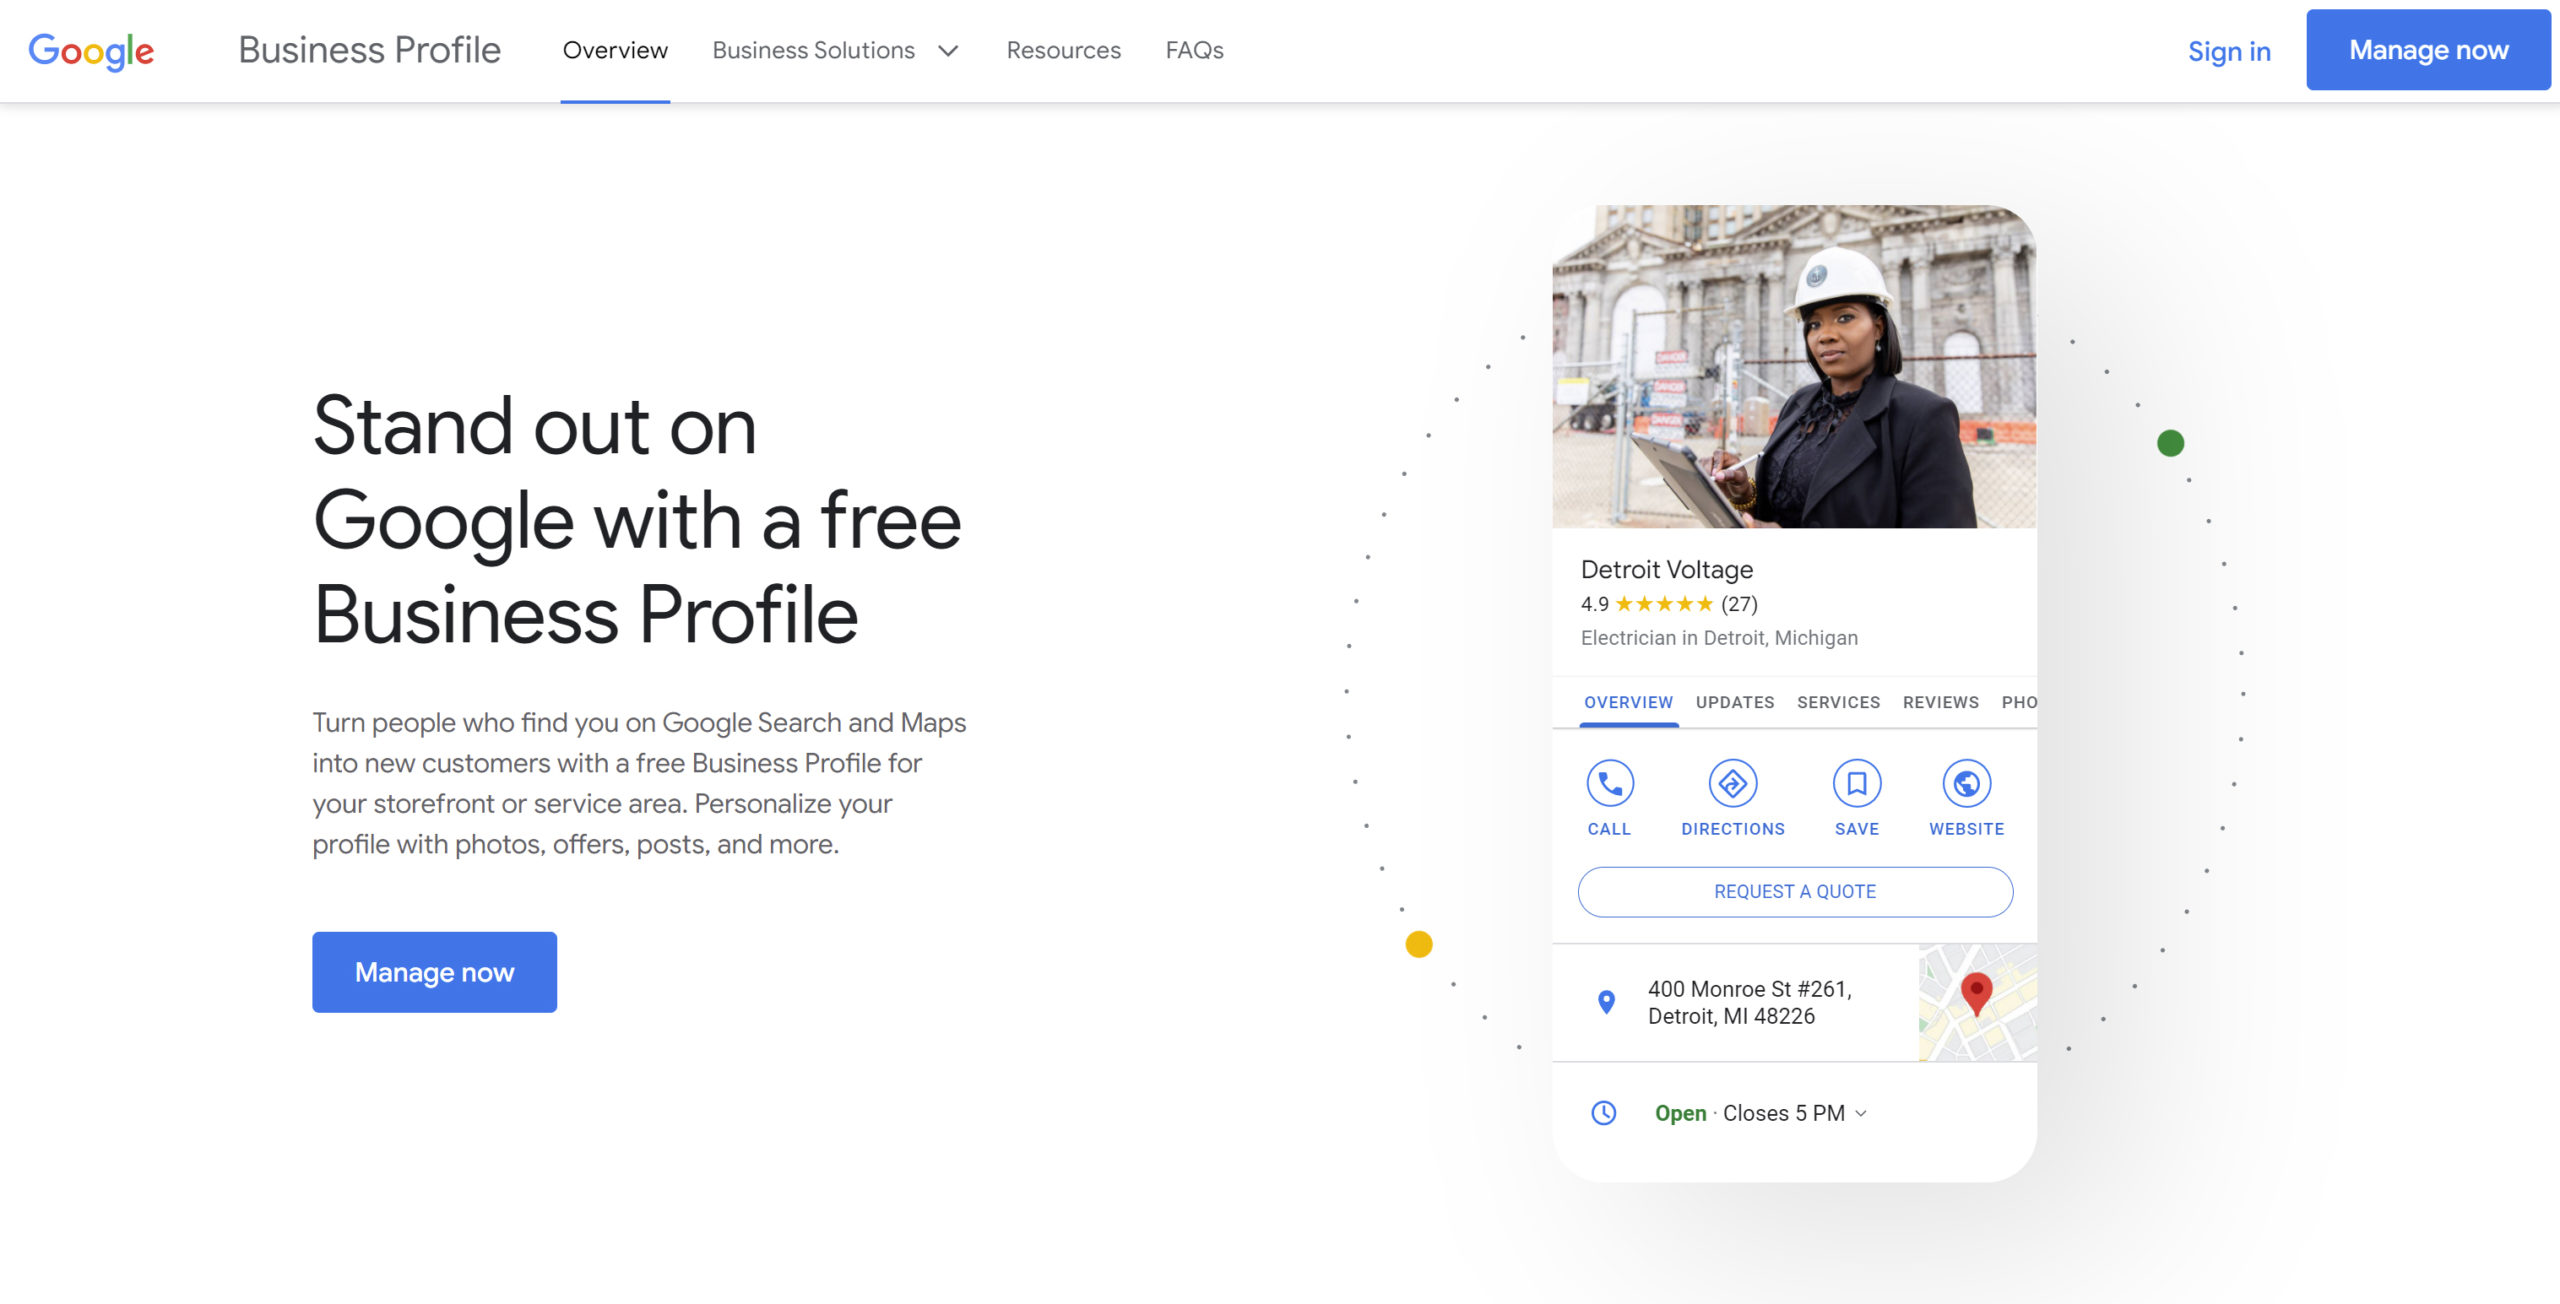 Stand out on Google with a free business profile.